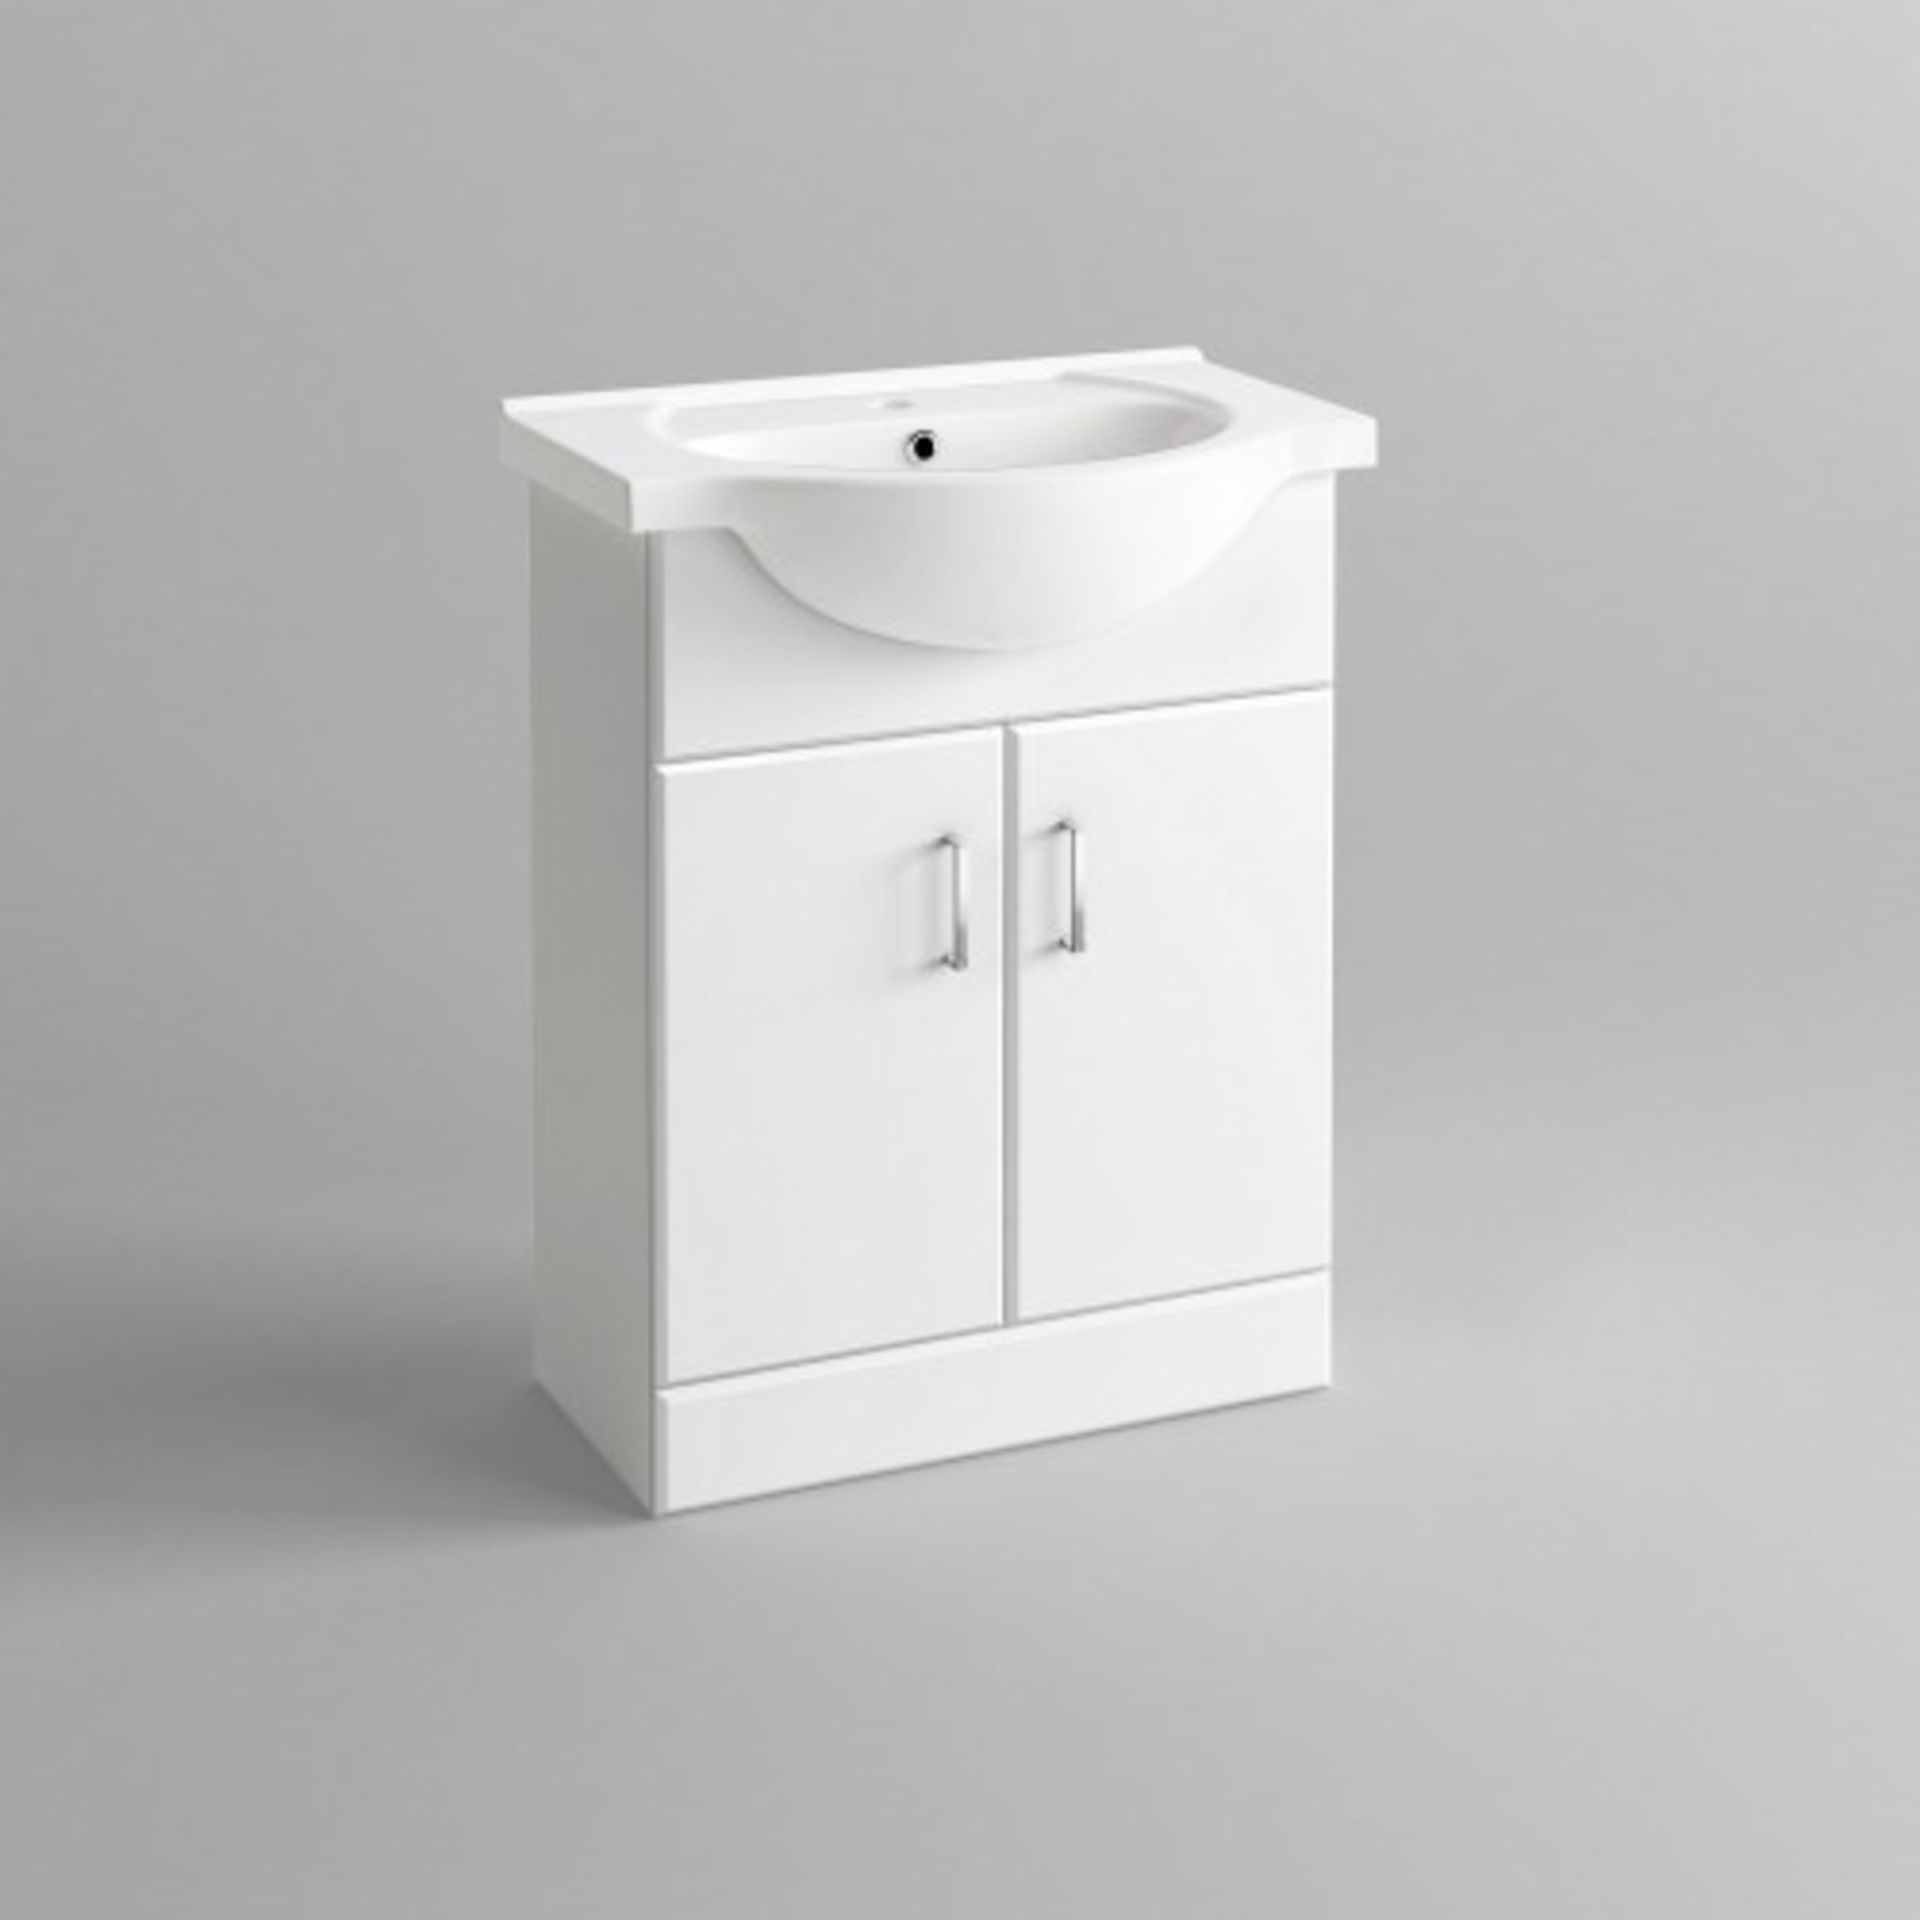 (J27) 550X300MM QUARTZ GLOSS WHITE BUILT IN BASIN CABINET. RRP £349.99. Comes complete with ba... - Image 2 of 3